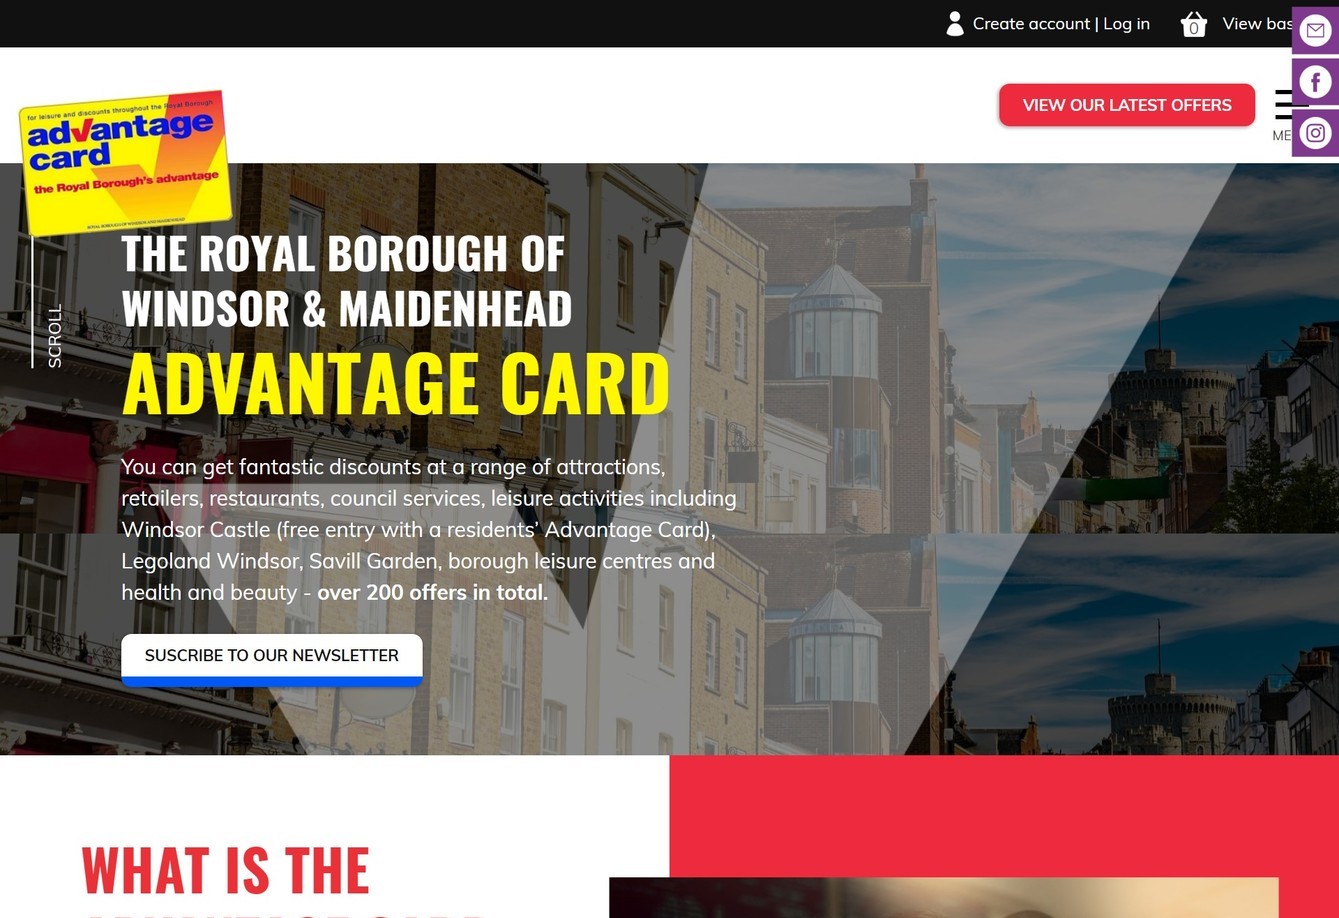 A responsive web design for an advantage card within Windsor shown on a desktop computer.